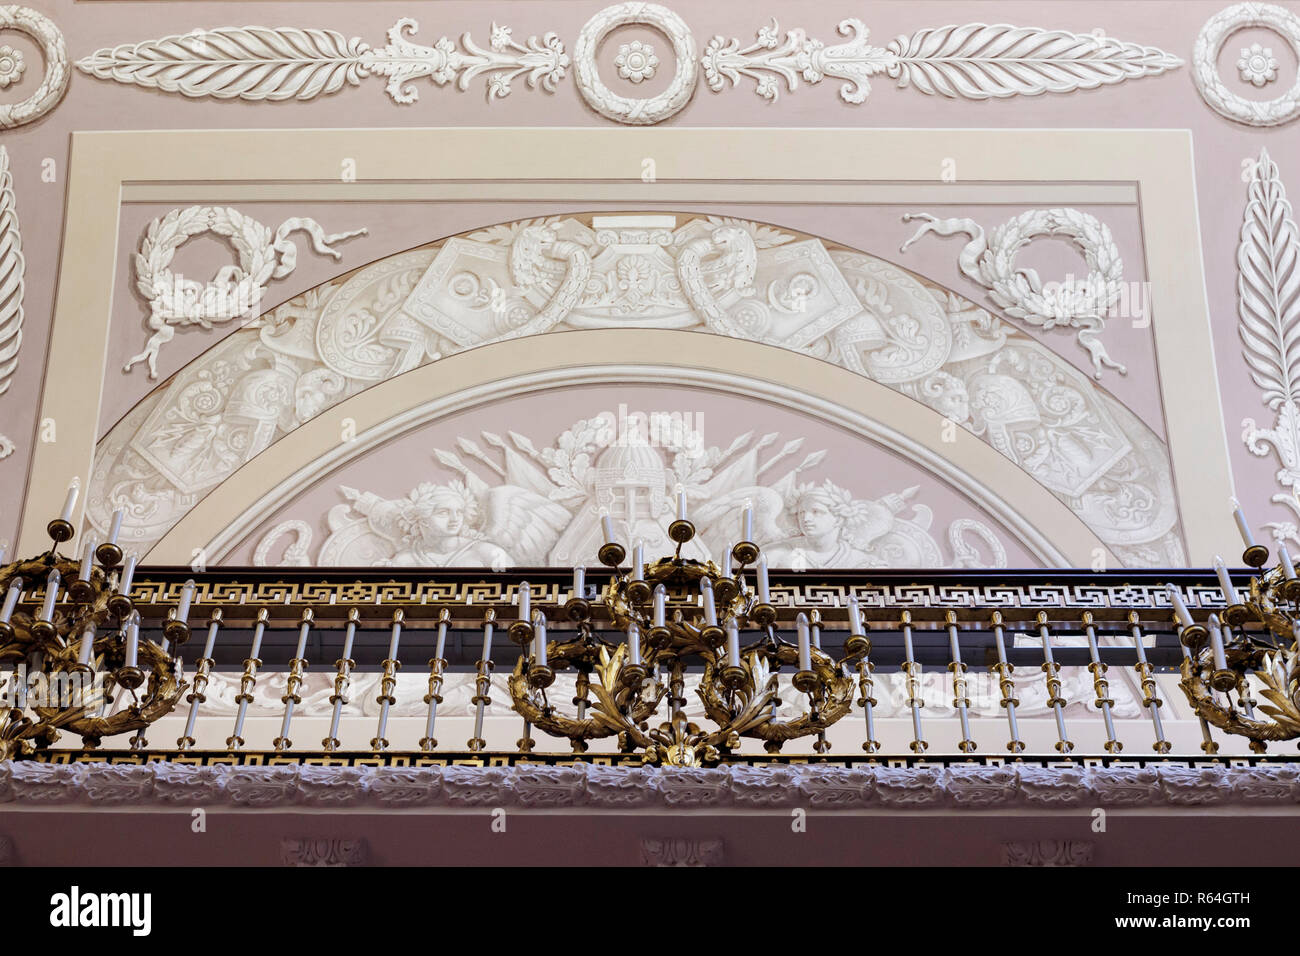 Gallery rail and wall showing intricate and ornate design with electrical candle light sconces. The Hermitage Museum, Winter Palace, St Petersburg. Stock Photo